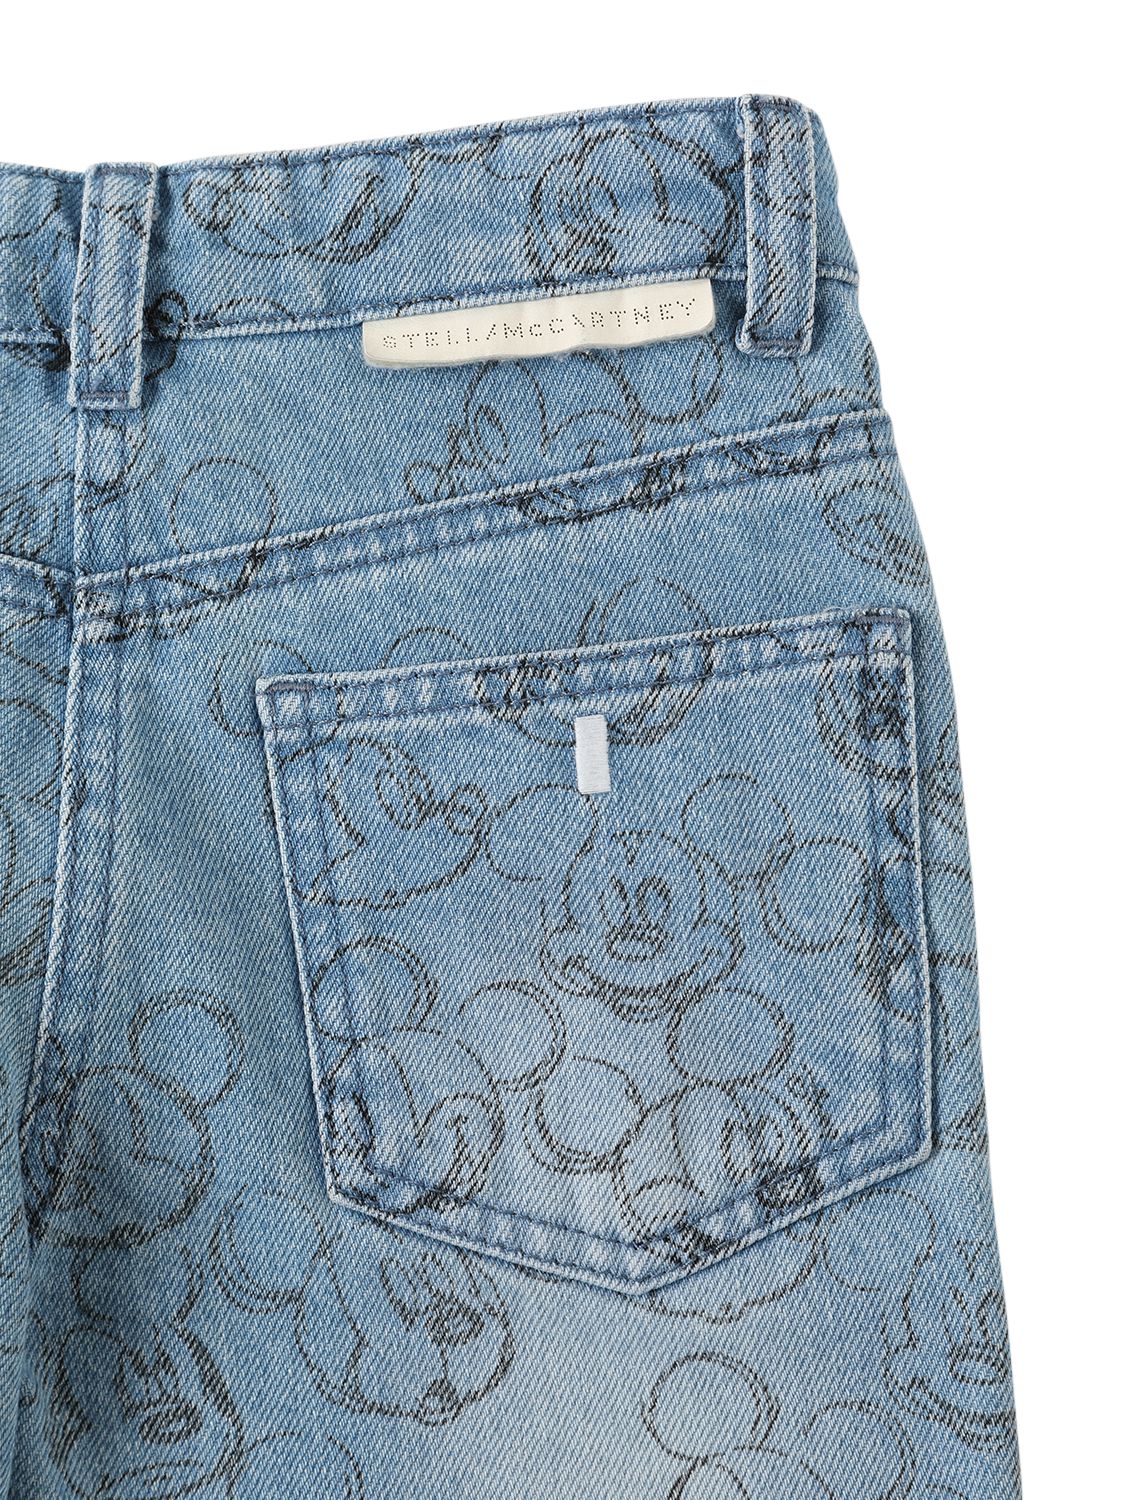 Luisaviaroma Girls Clothing Jeans Stretch Jeans Mickey Mouse Print Stretch Jeans 